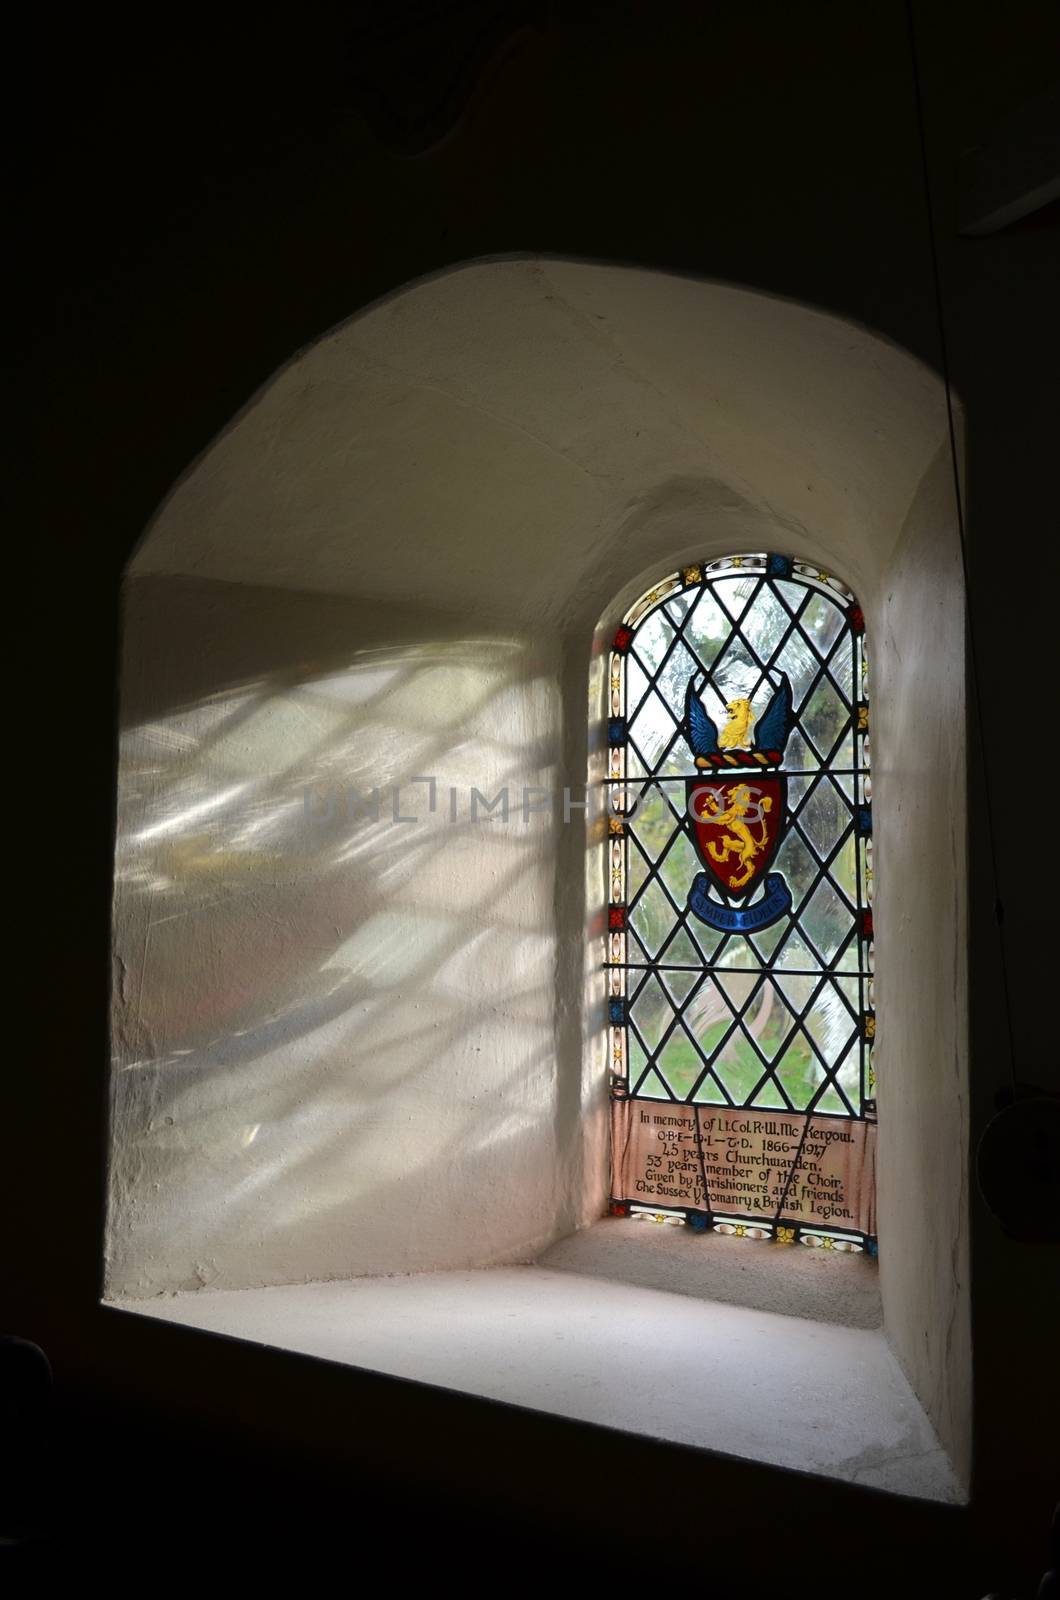 A beautiful recessed stained glass window at St Peters in the tiny hamlet of Twineham in the County of Sussex,England. The church dates from around 1695.